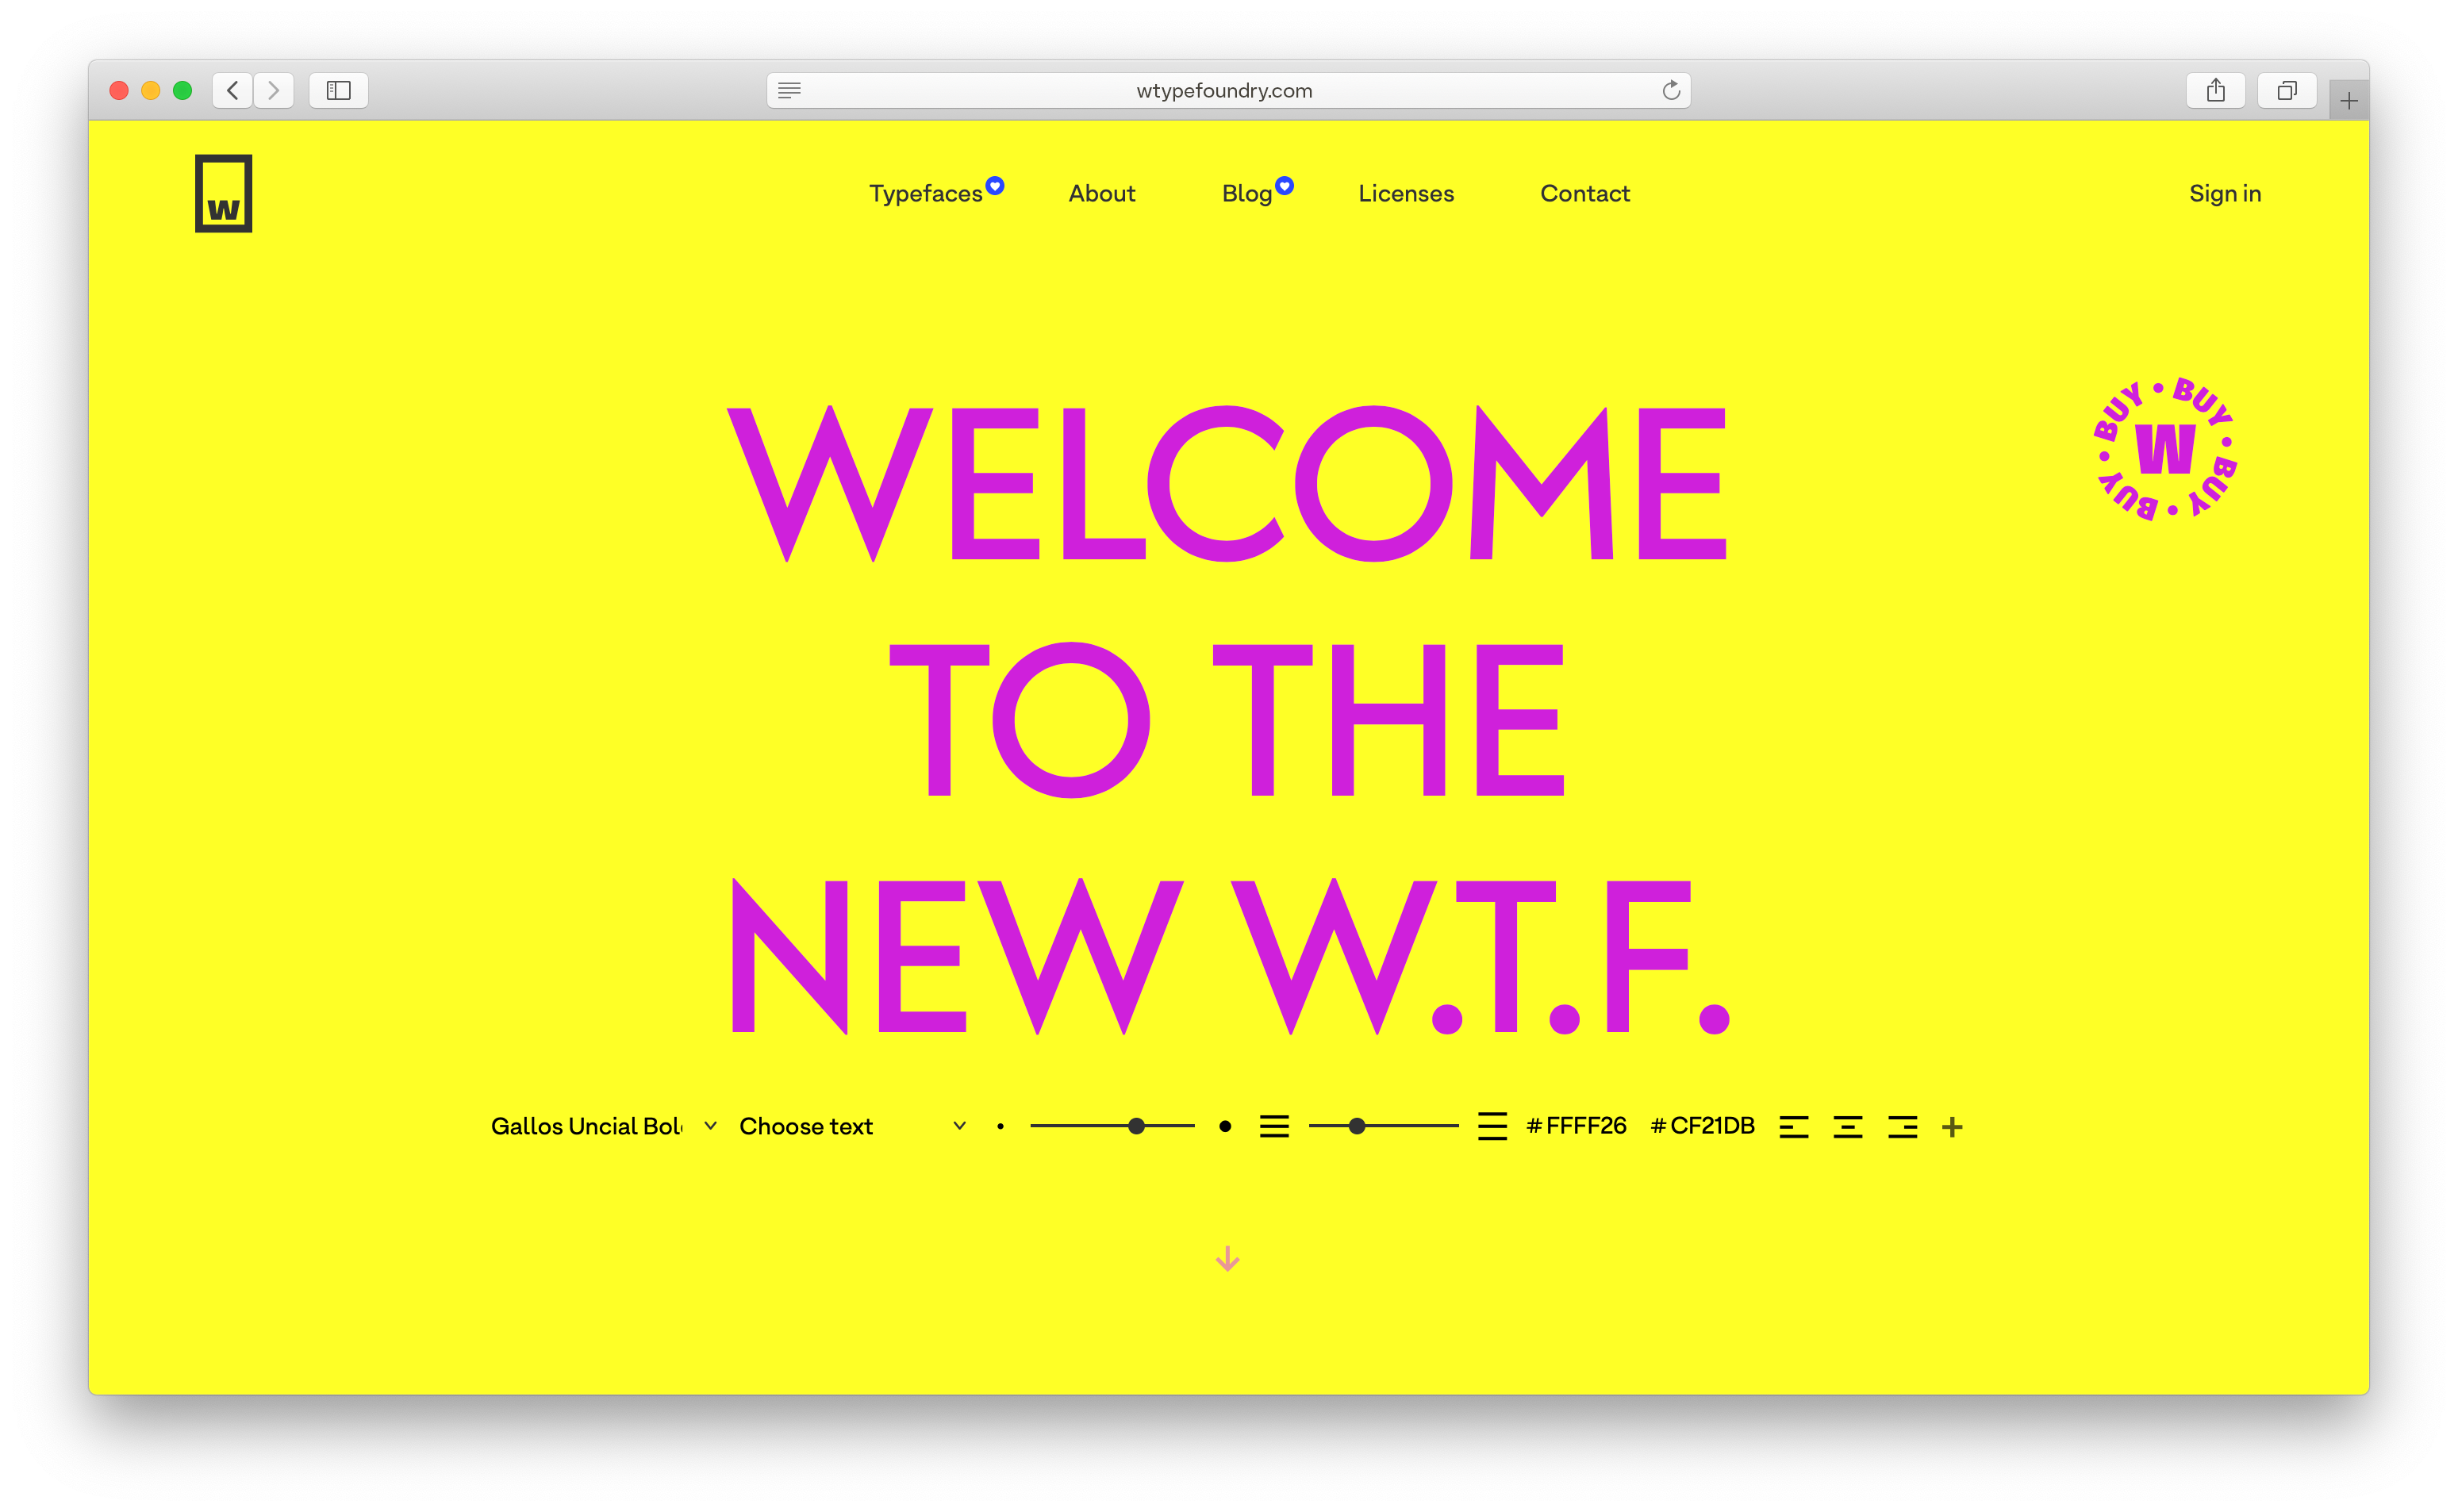 The new W Type Foundry website tester